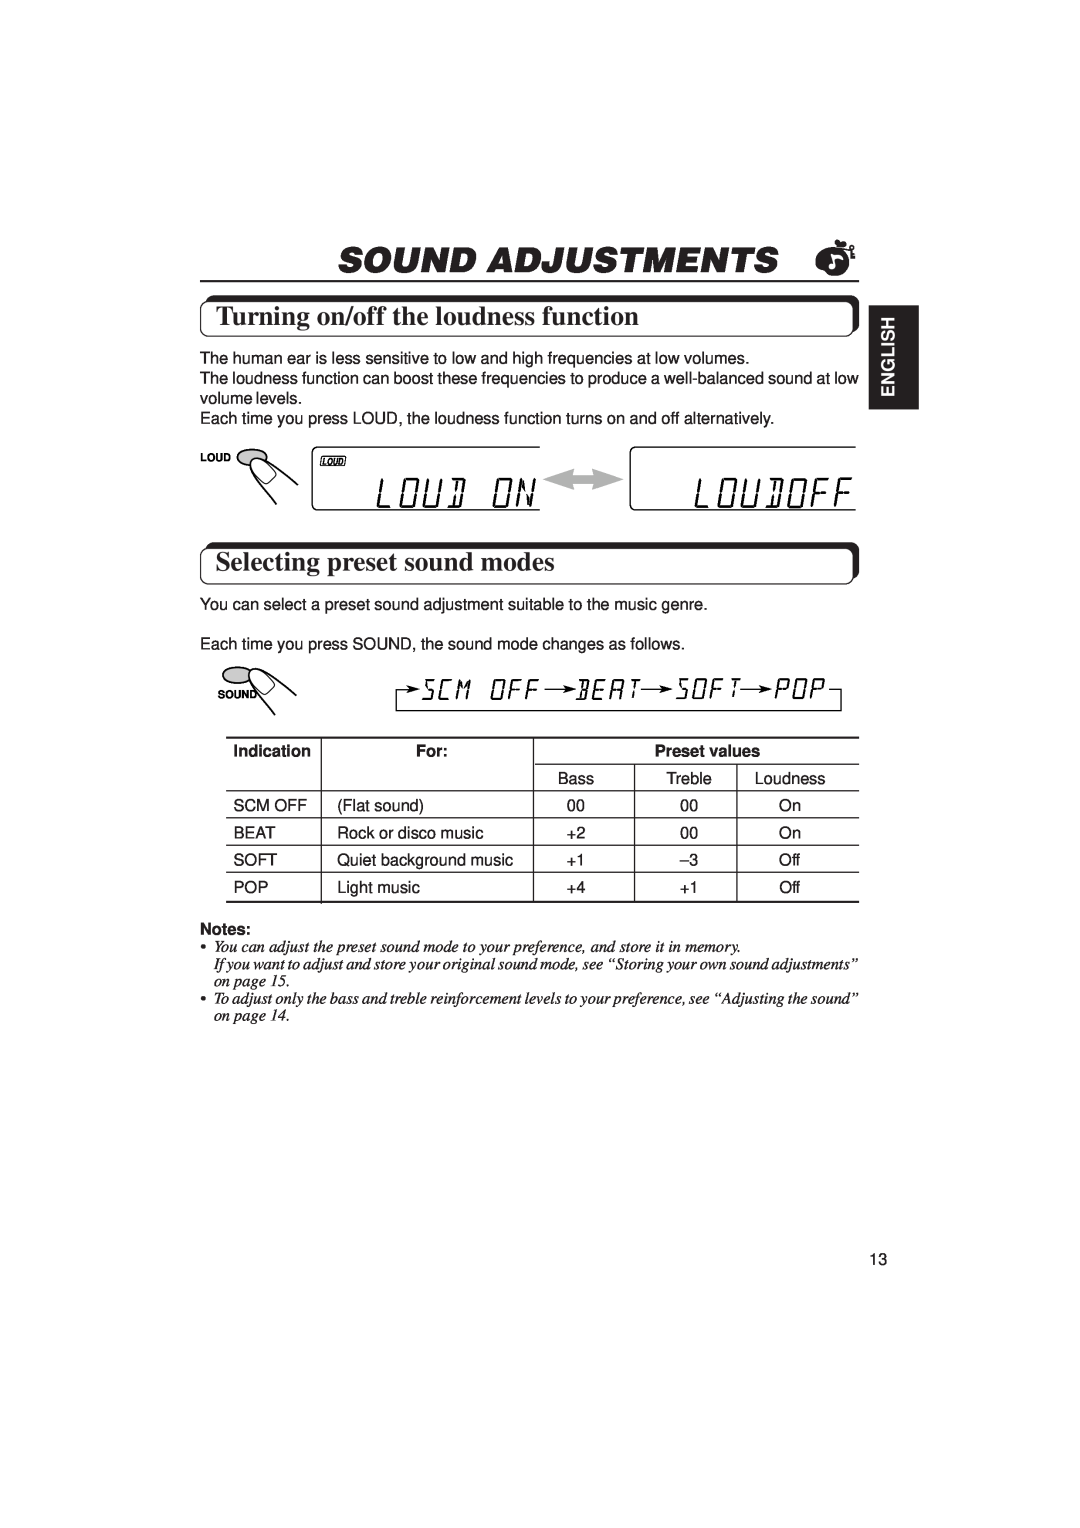 JVC KD-S636 Sound Adjustments, Turning on/off the loudness function, Selecting preset sound modes, English, Indication 